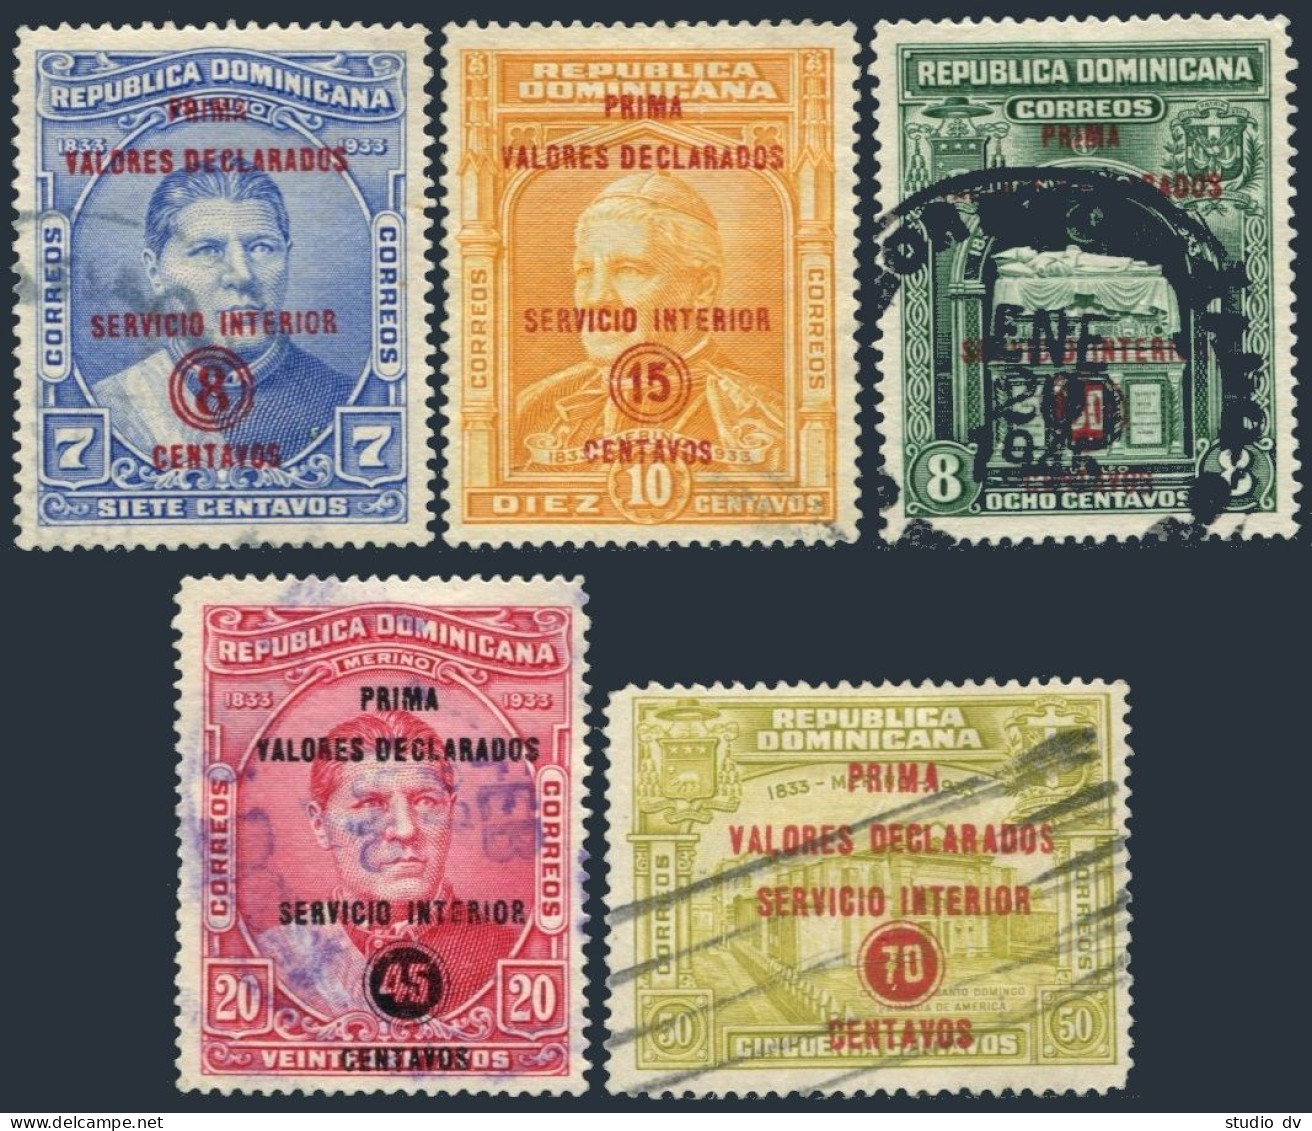 Dominican Rep G1-G5, Used. Mi 294-298. Insured Letter Stamps 1935. Merino Issue. - Dominican Republic